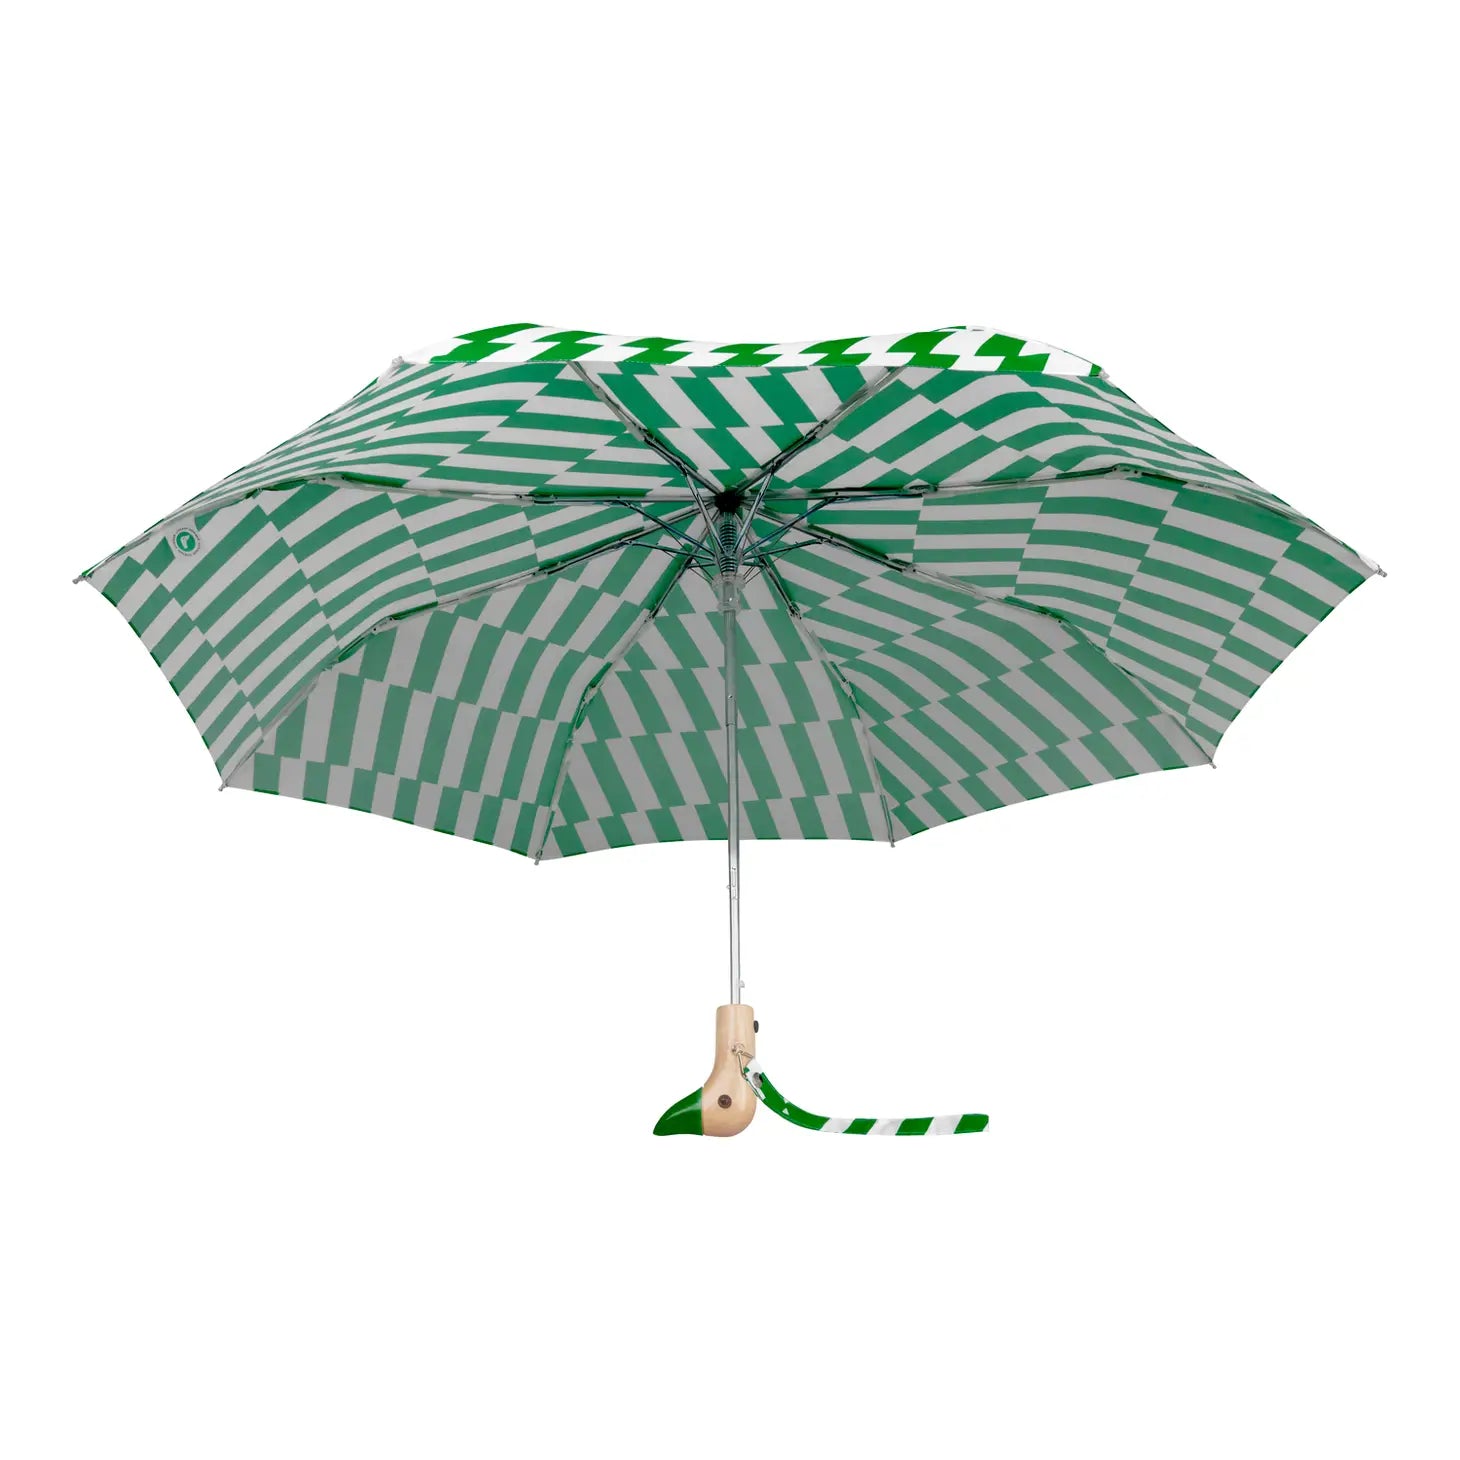 The Every Space handmade green, duck handled umbrellas, by Original Duckhead, are wind resistant with an automatic open button, and made from 100% recycled fabric.